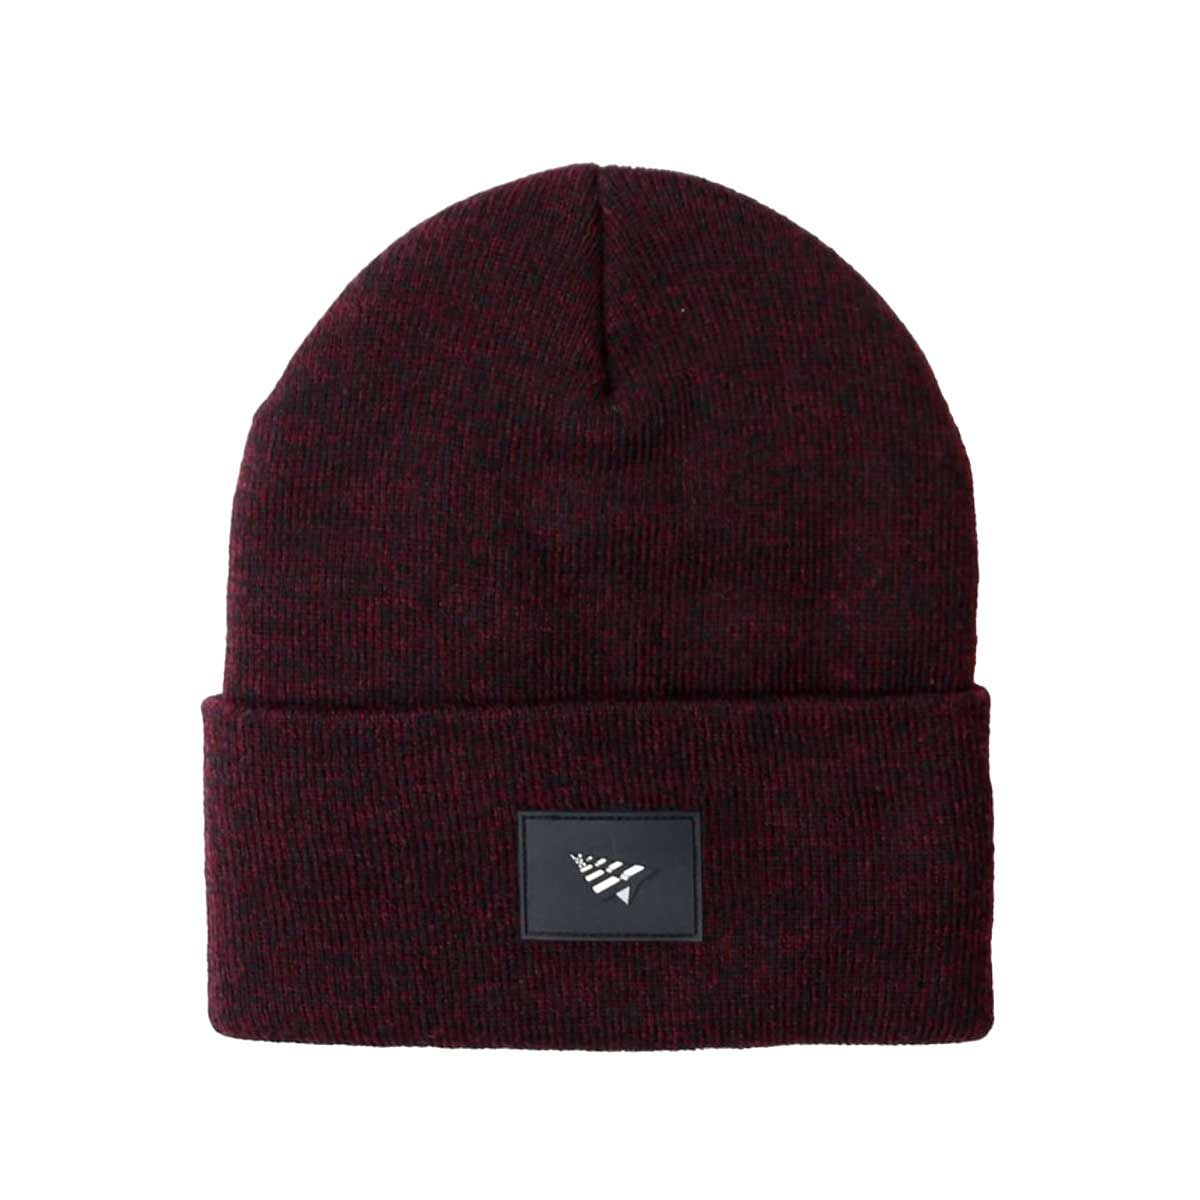 Paper Planes Clothing Patch Skull Cap Red